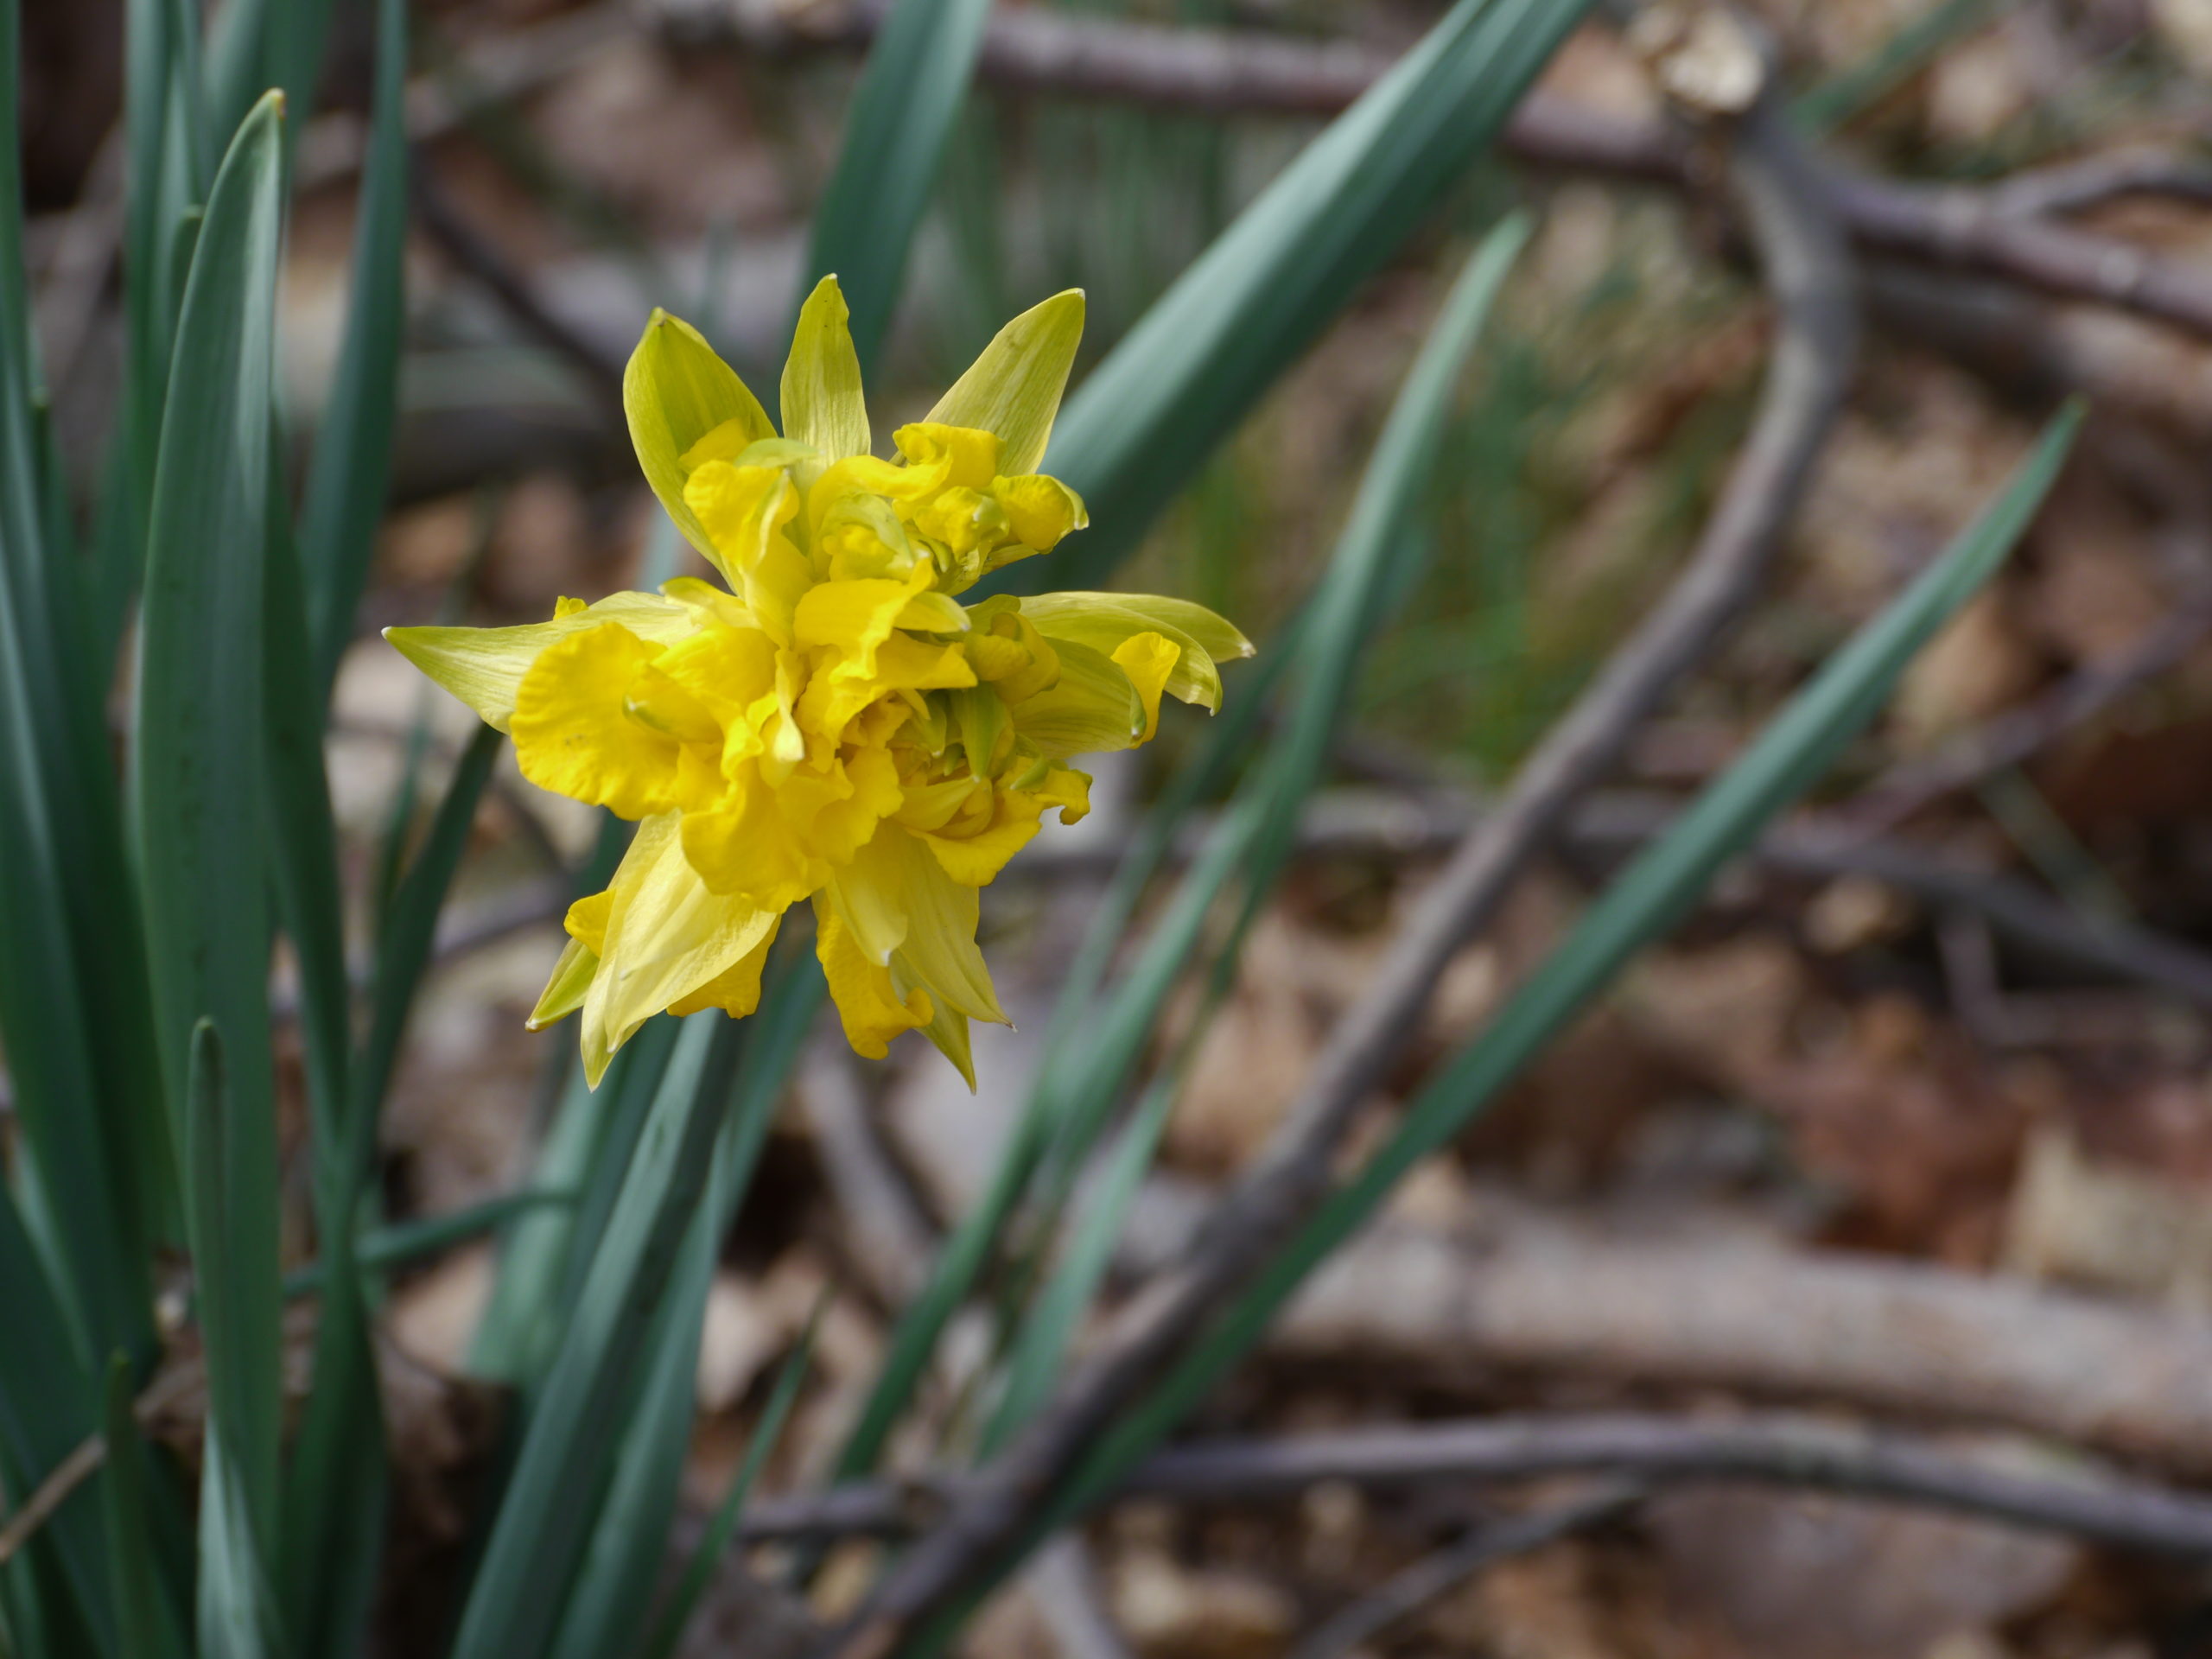 This unusual daffodil was found in the woods of an old North Shore estate. It was probably planted in the 1920s. It only flowers every other year and is double with outer flat petals showing shades of green against the inner yellows.